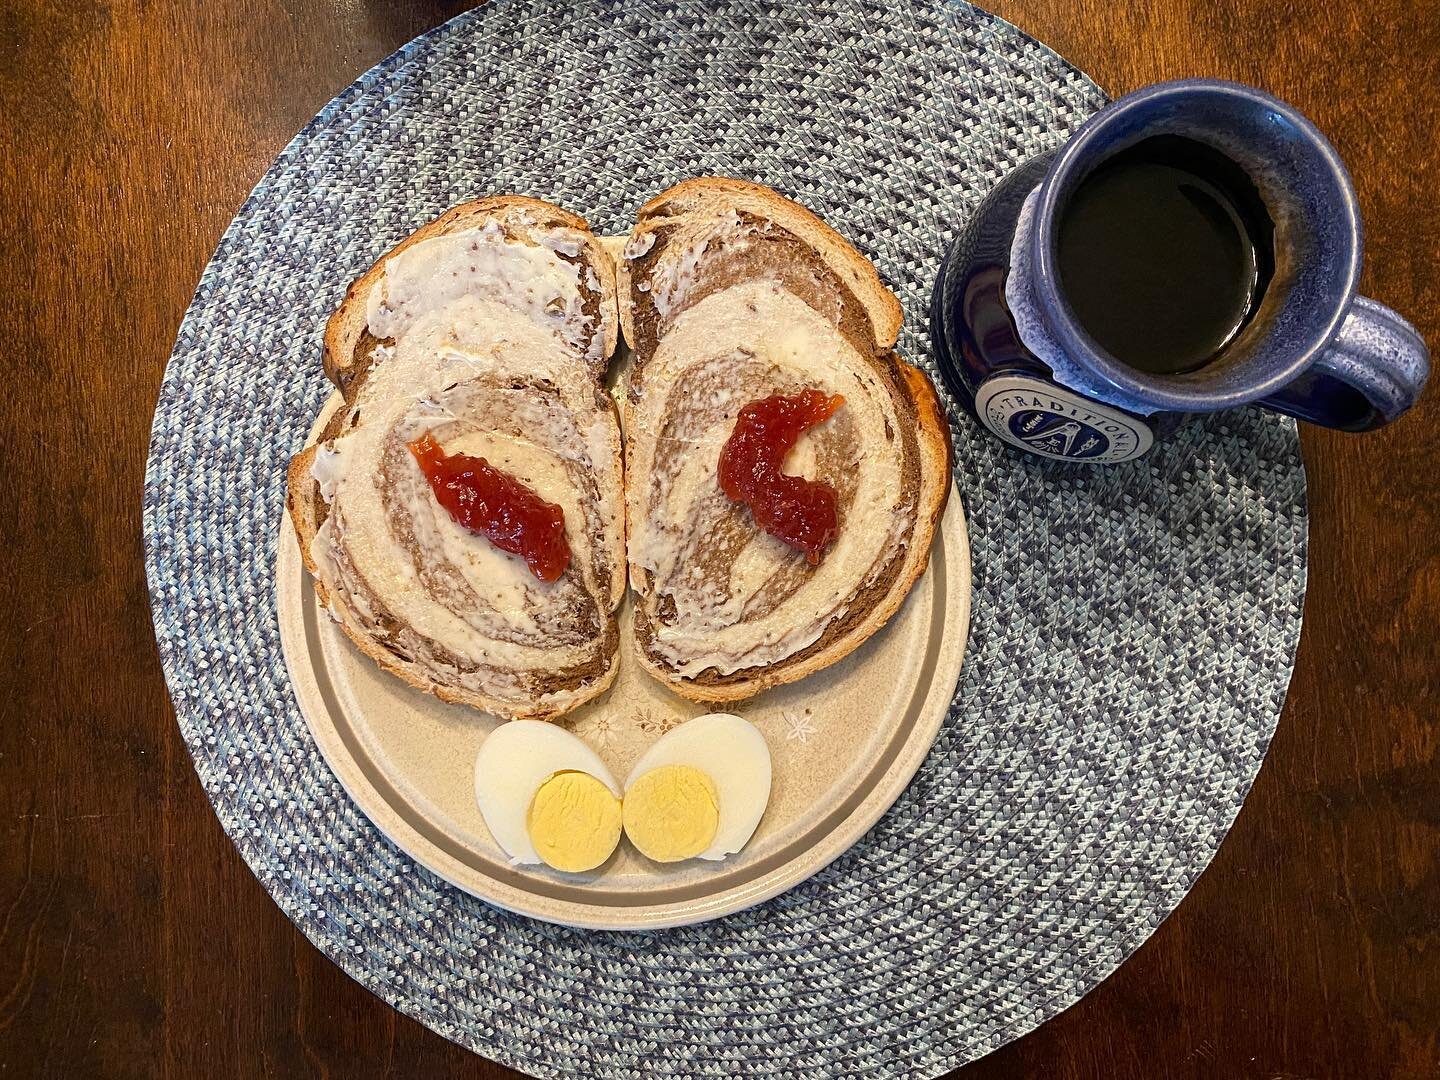 #hobbitday2022 
Breakfast: marbled rye bread with butter and strawberry preserves with a hard boiled egg and black coffee. 
#eatlikeahobbit